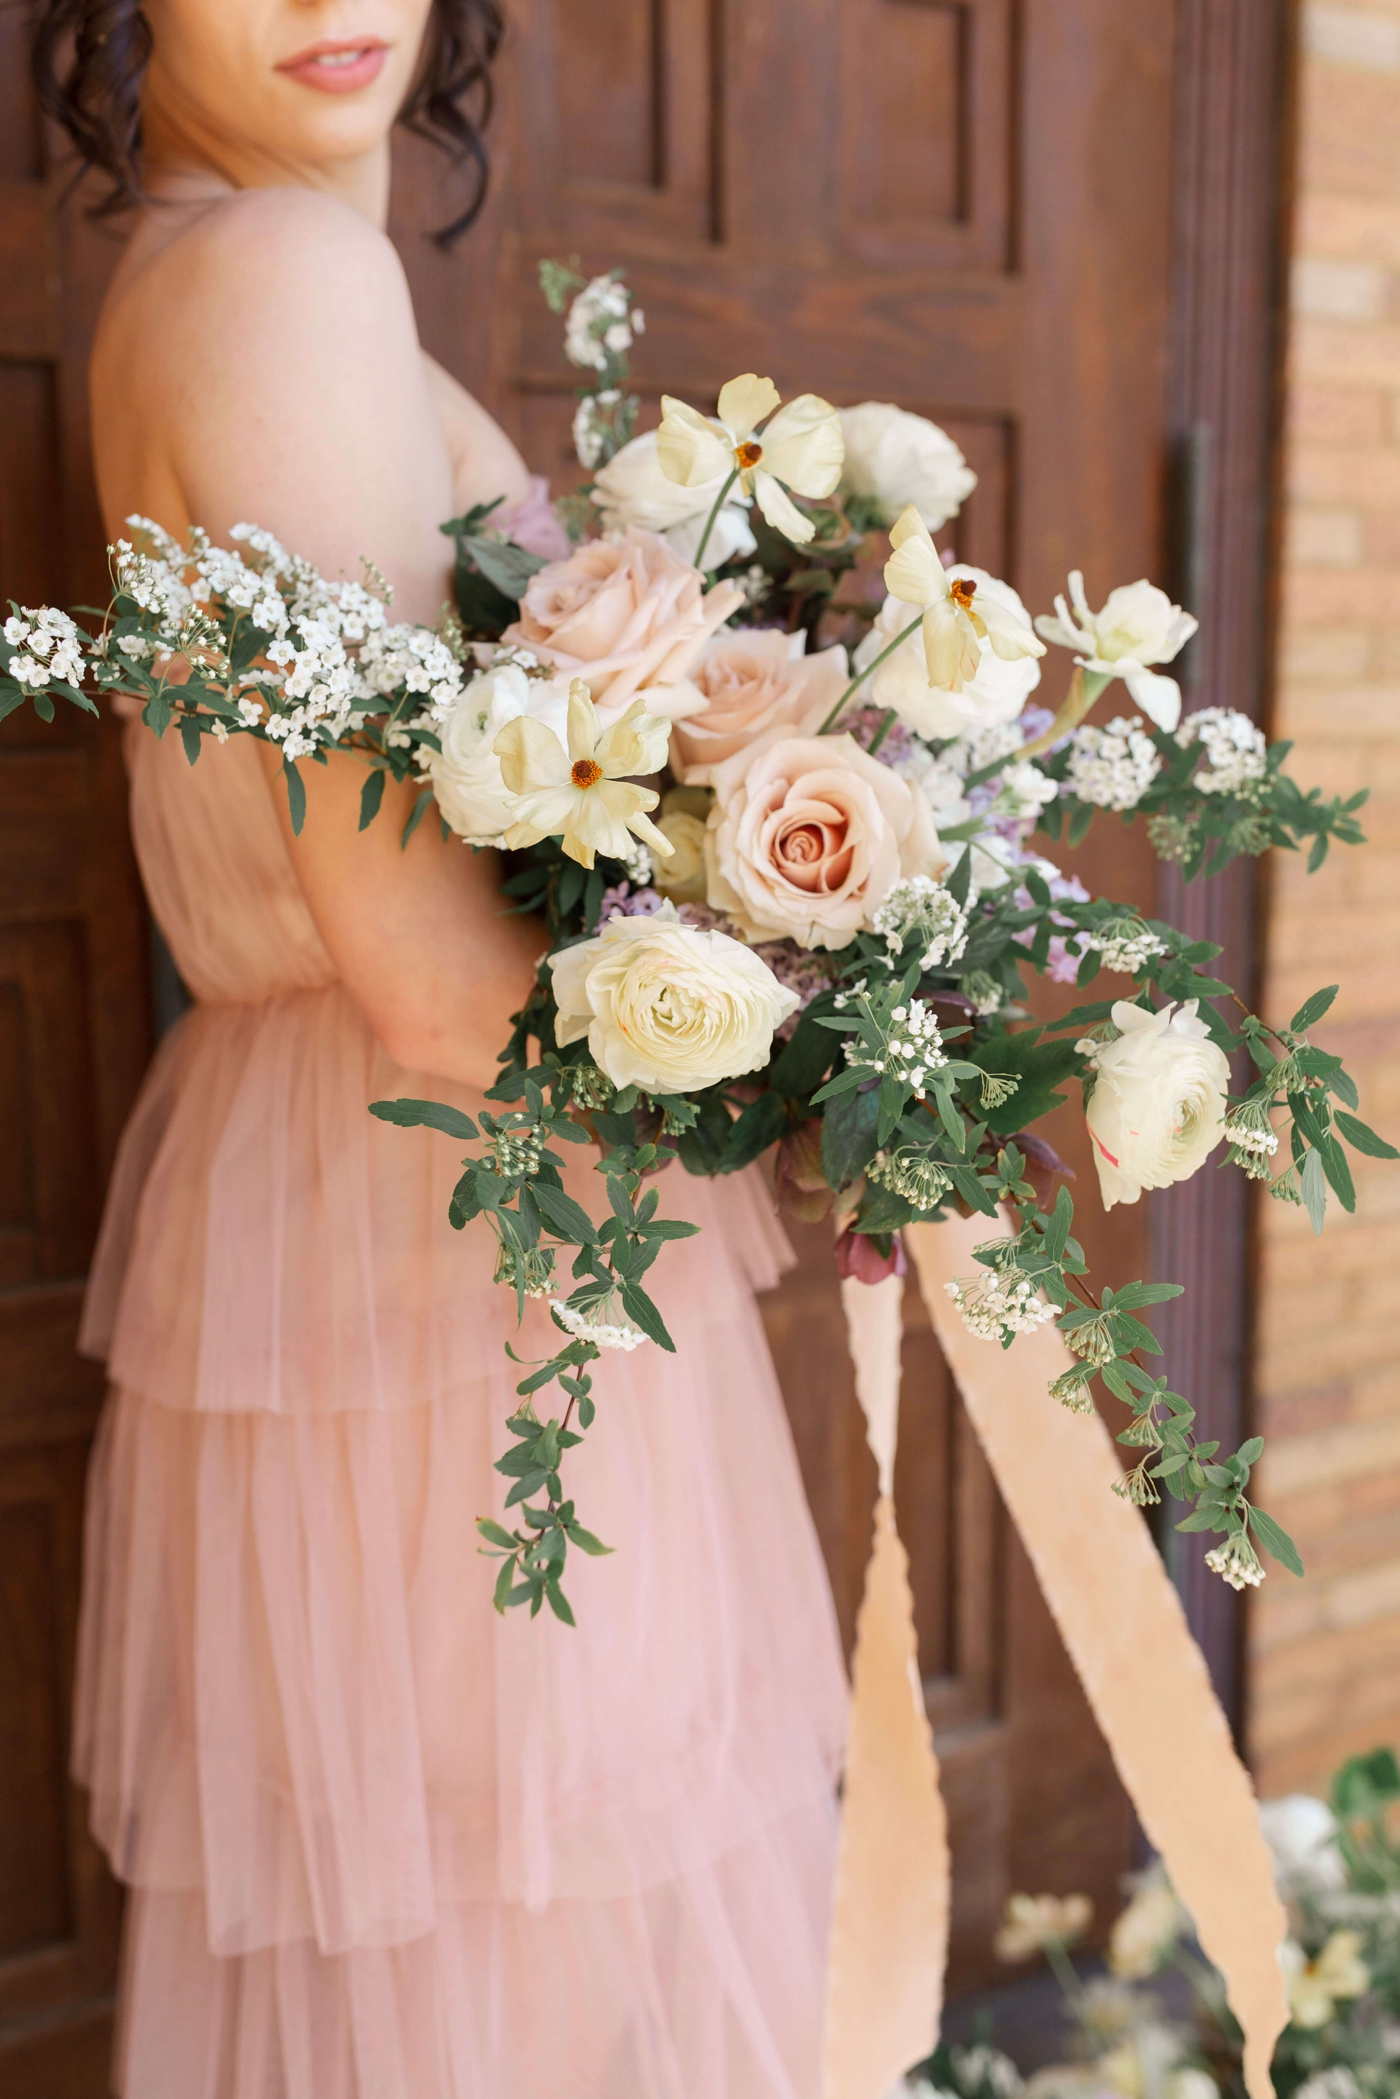 Bridal bouquet filled with yellow cosmos, pink roses, and Sweet alyssum by Wild Indigo